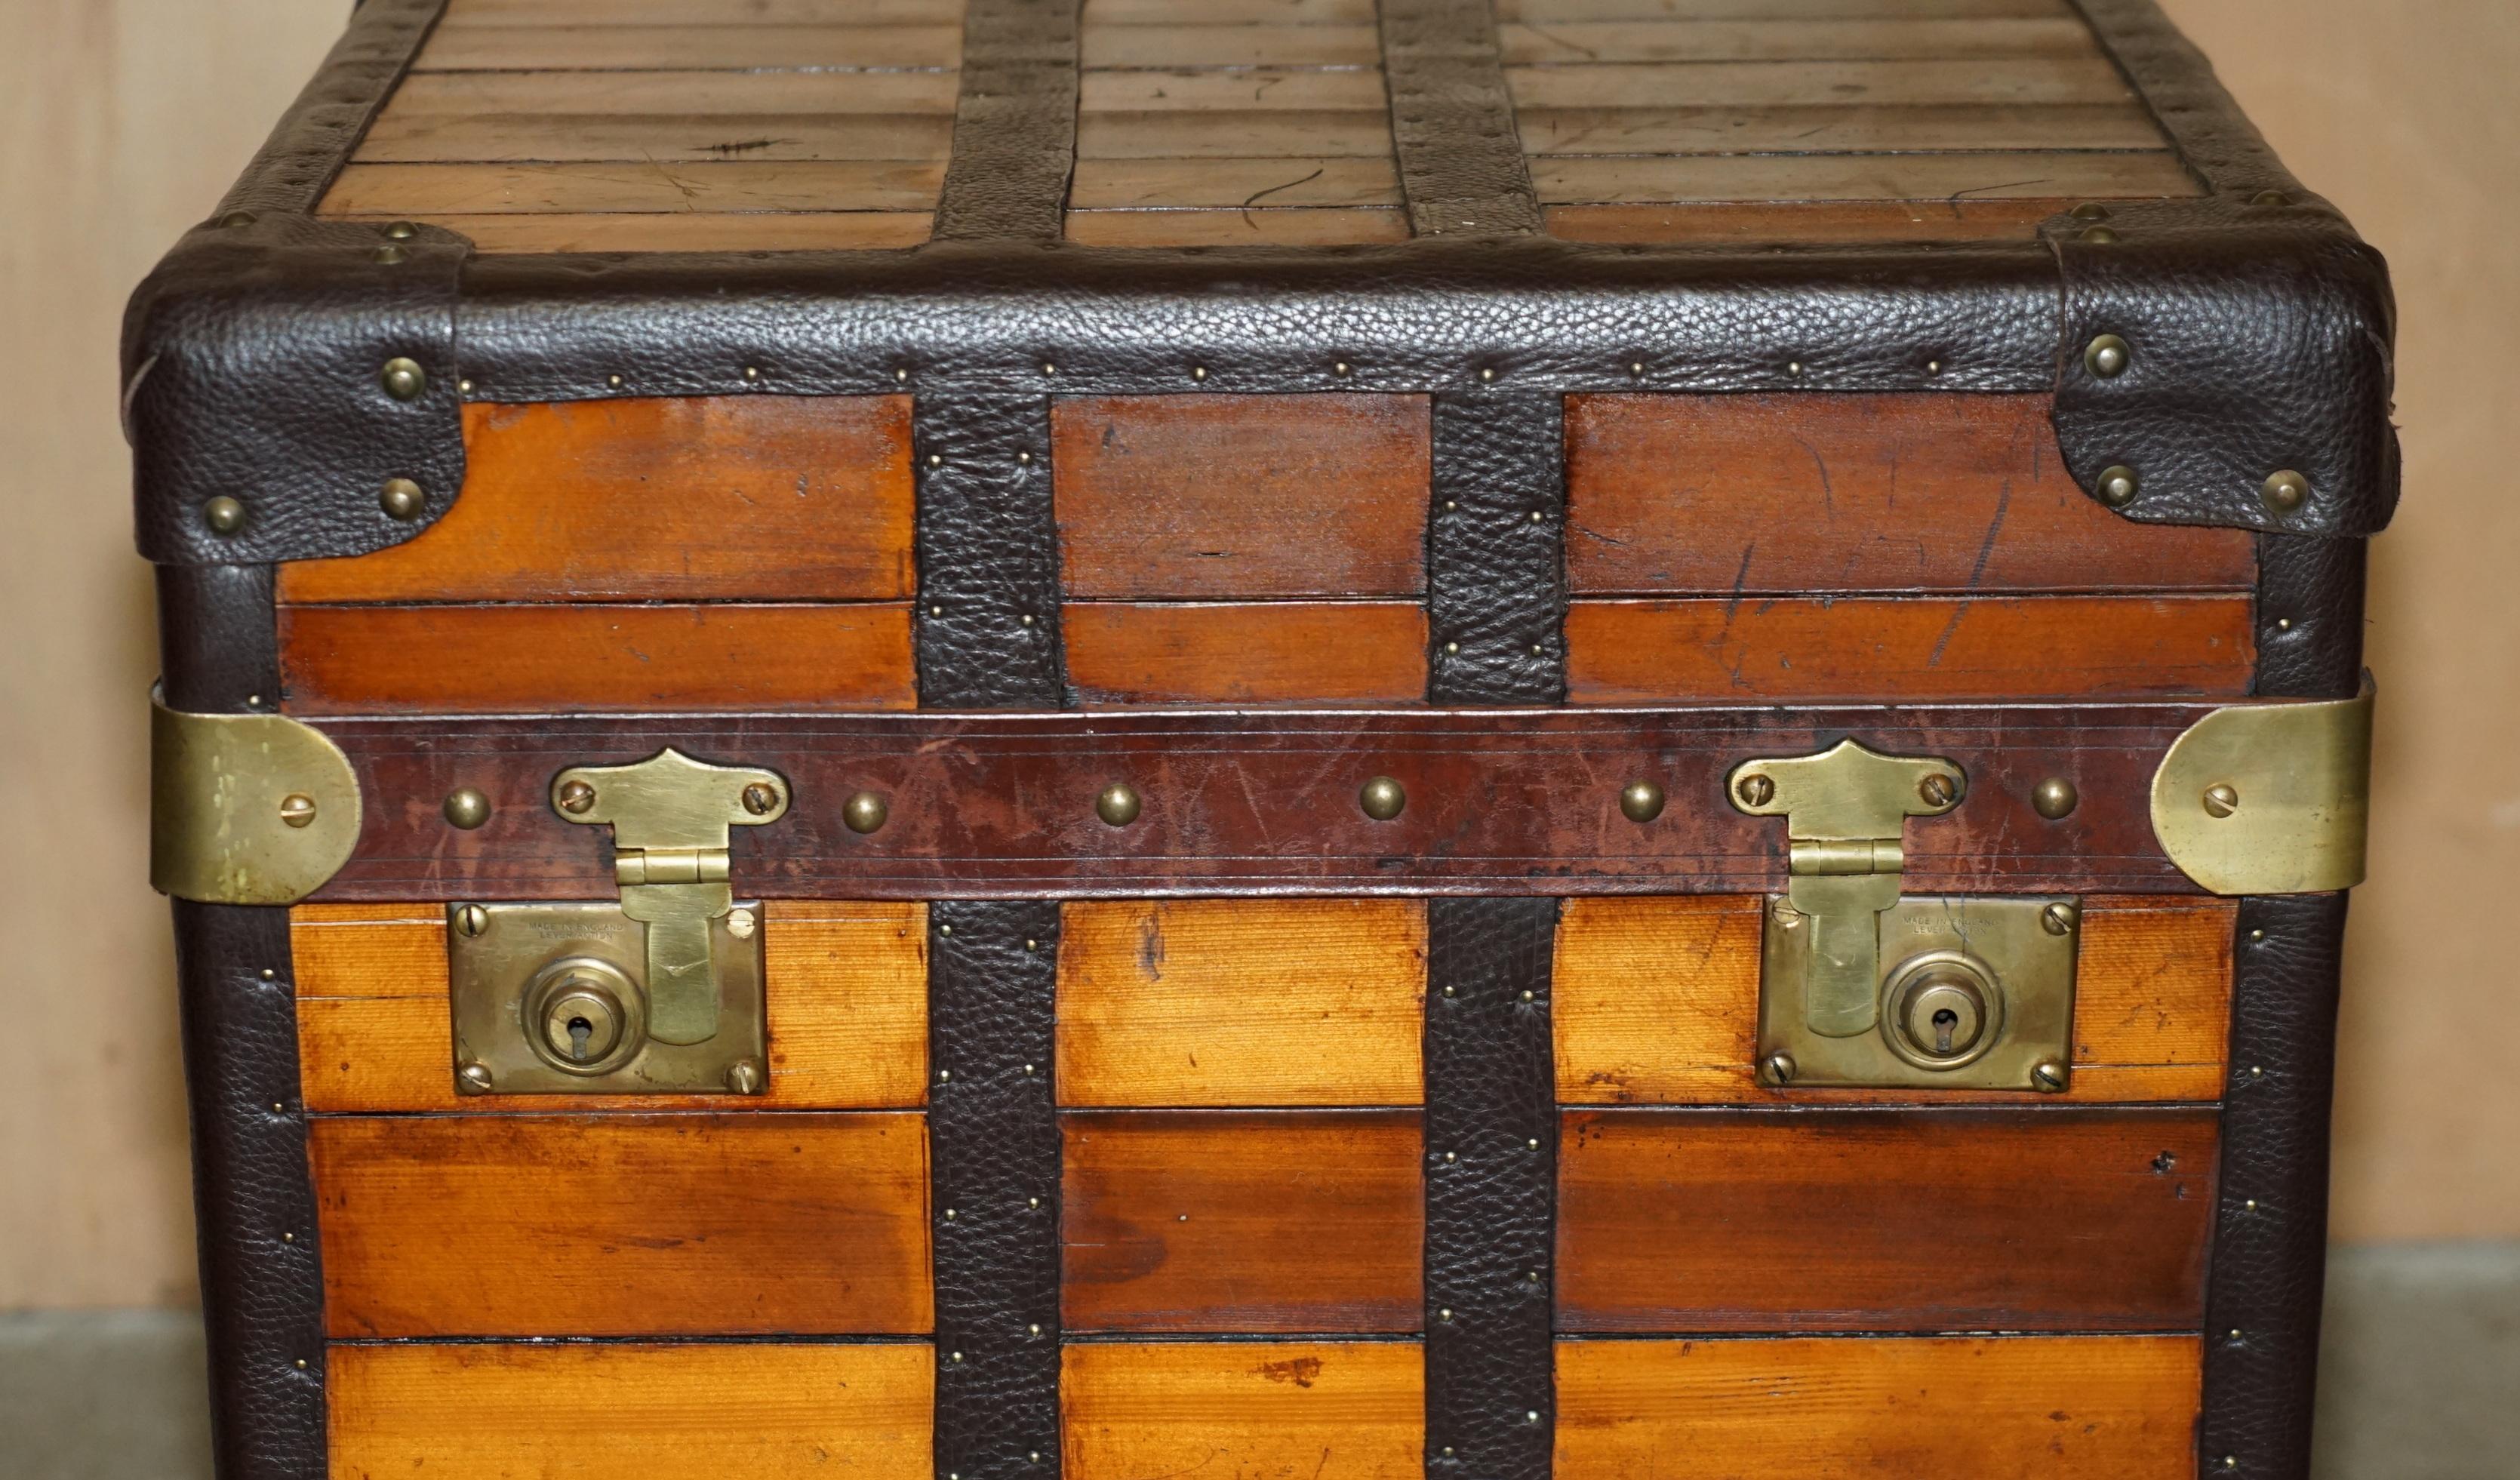 English PAIR OF STUNNING ViNTAGE ENGLISH SIDE TABLES STORAGE TRUNKS SLATTED WOOD LEATHER